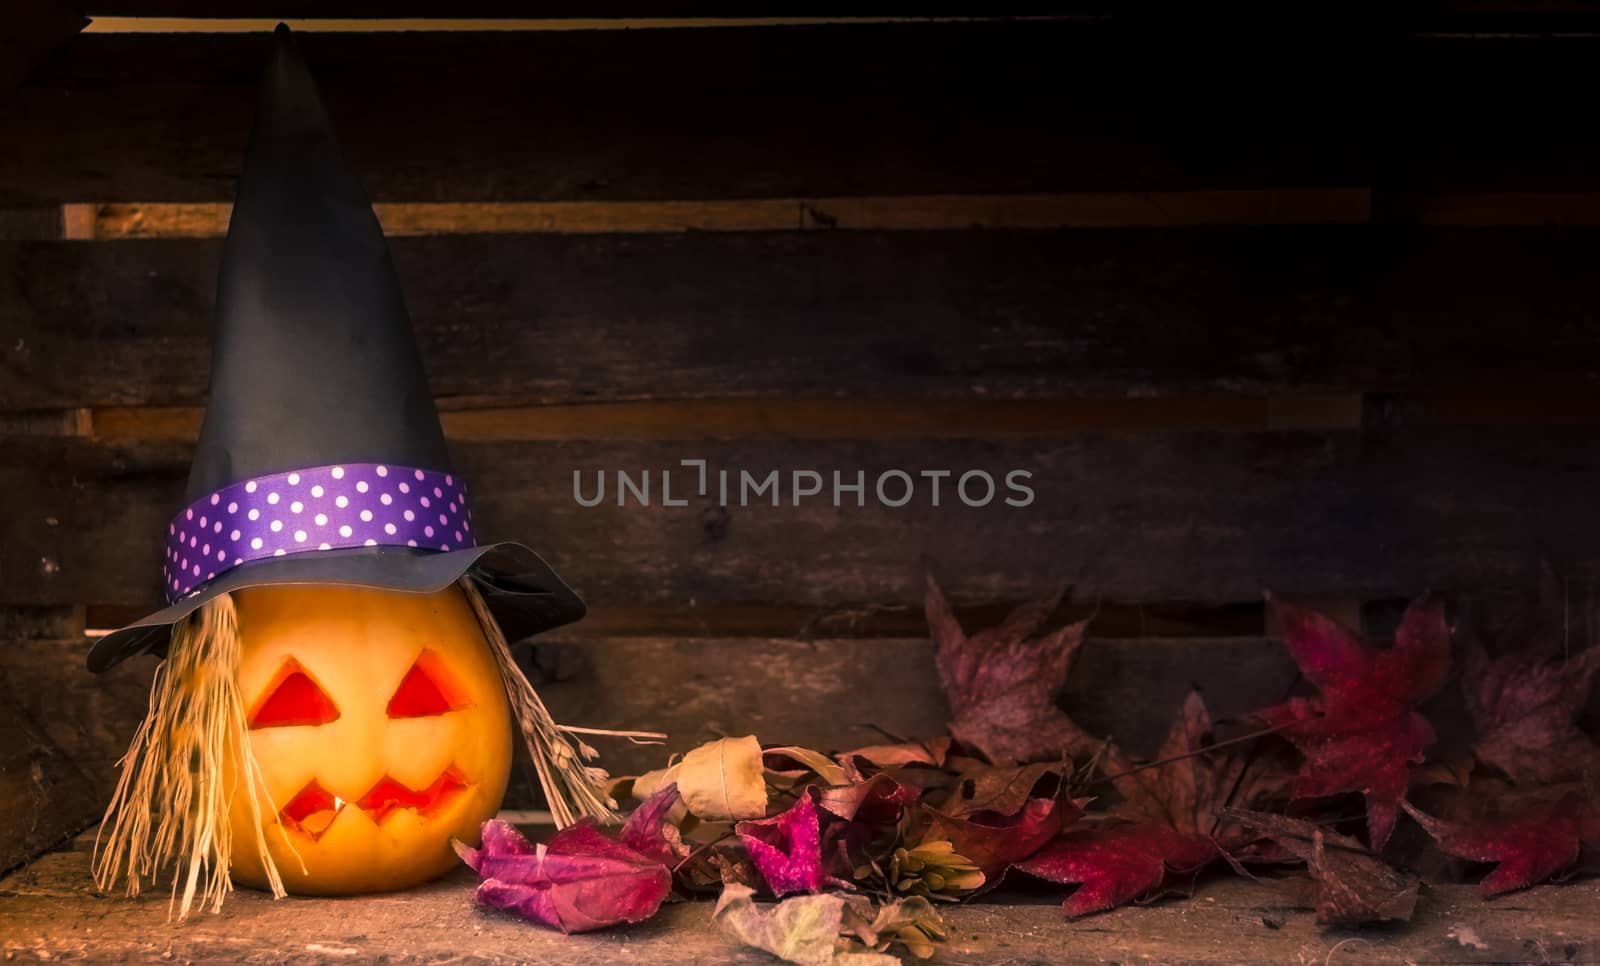 original decorations with pumpkins and halloween witch hats by GabrielaBertolini